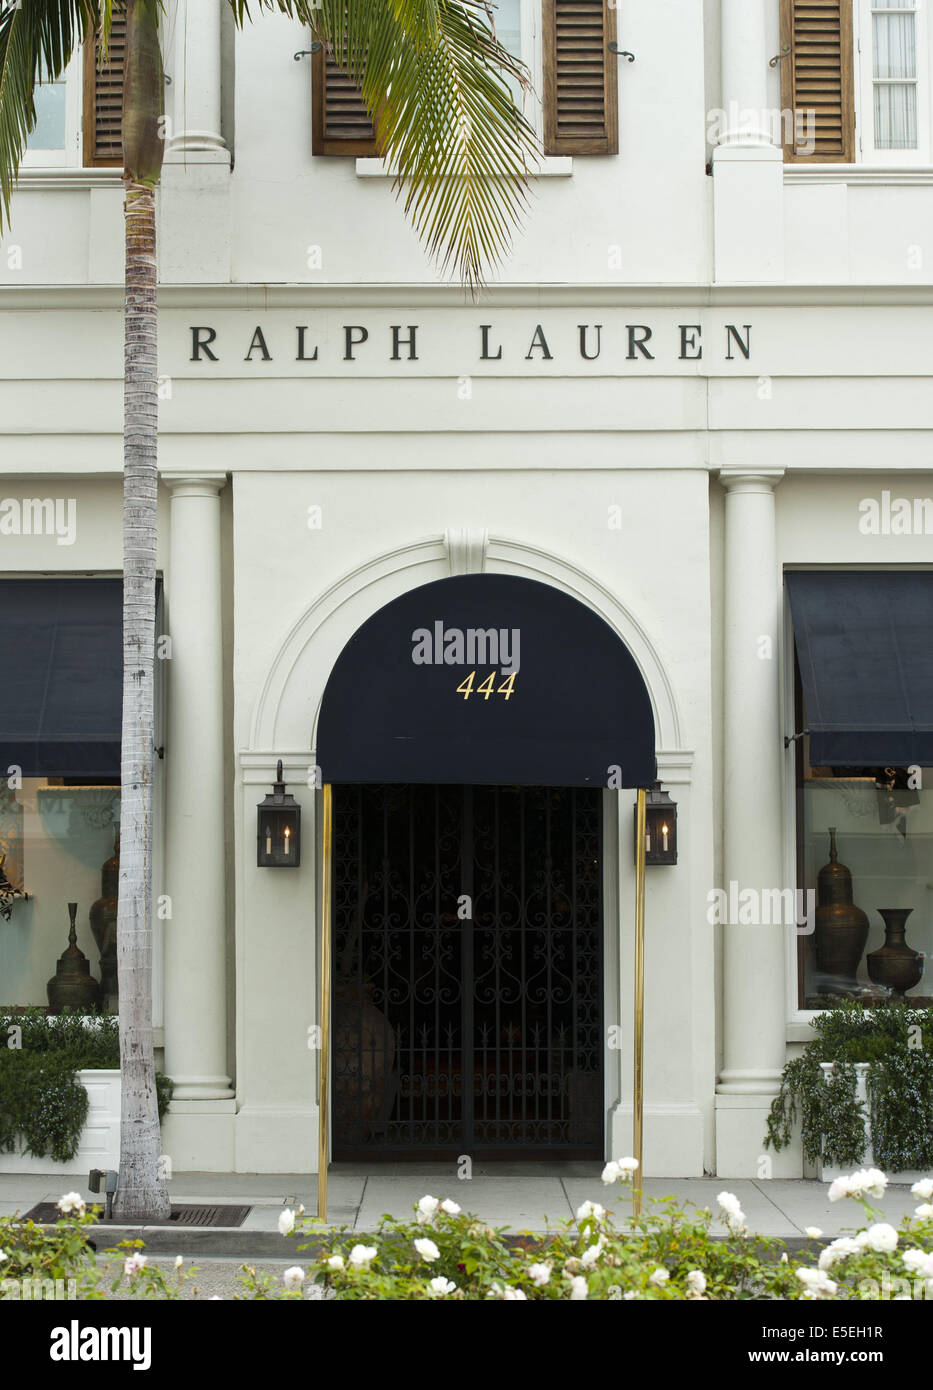 June 23, 2014 - Beverly Hills/Los Angeles, California,  - Ralph Lauren  opened his first boutique, 'Polo,' on Rodeo Drive in 1971. Lauren, working  as a tie salesmen, designed his own tie